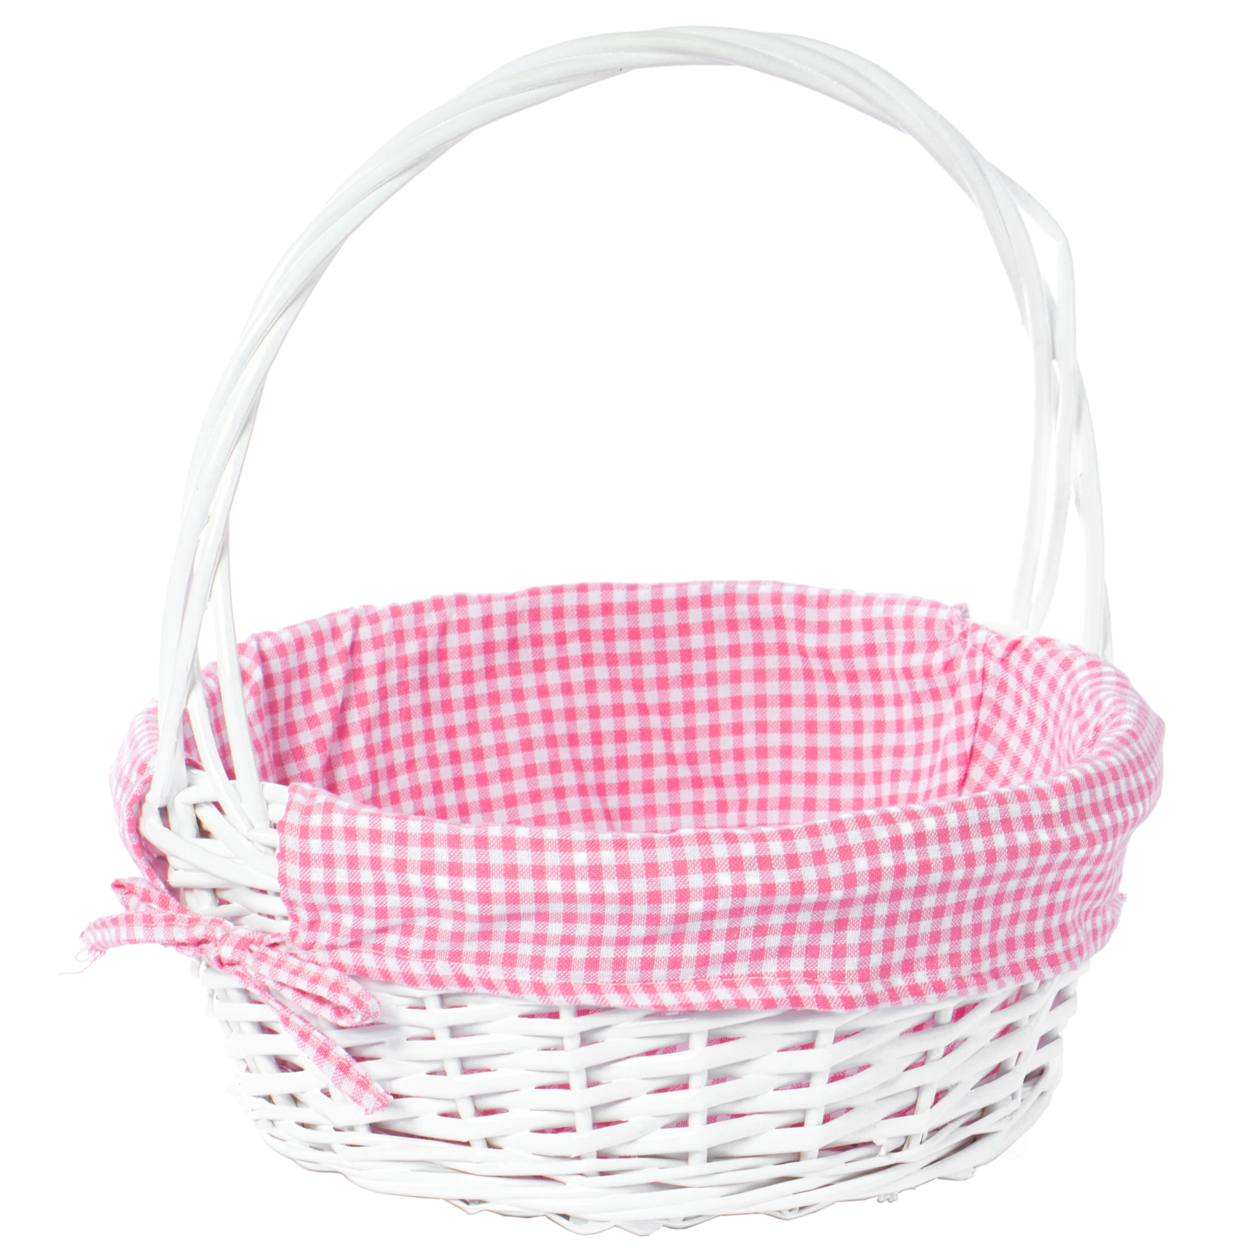 White Round Willow Gift Basket, With Blue And White Gingham Liner And Handles - Pink Medium